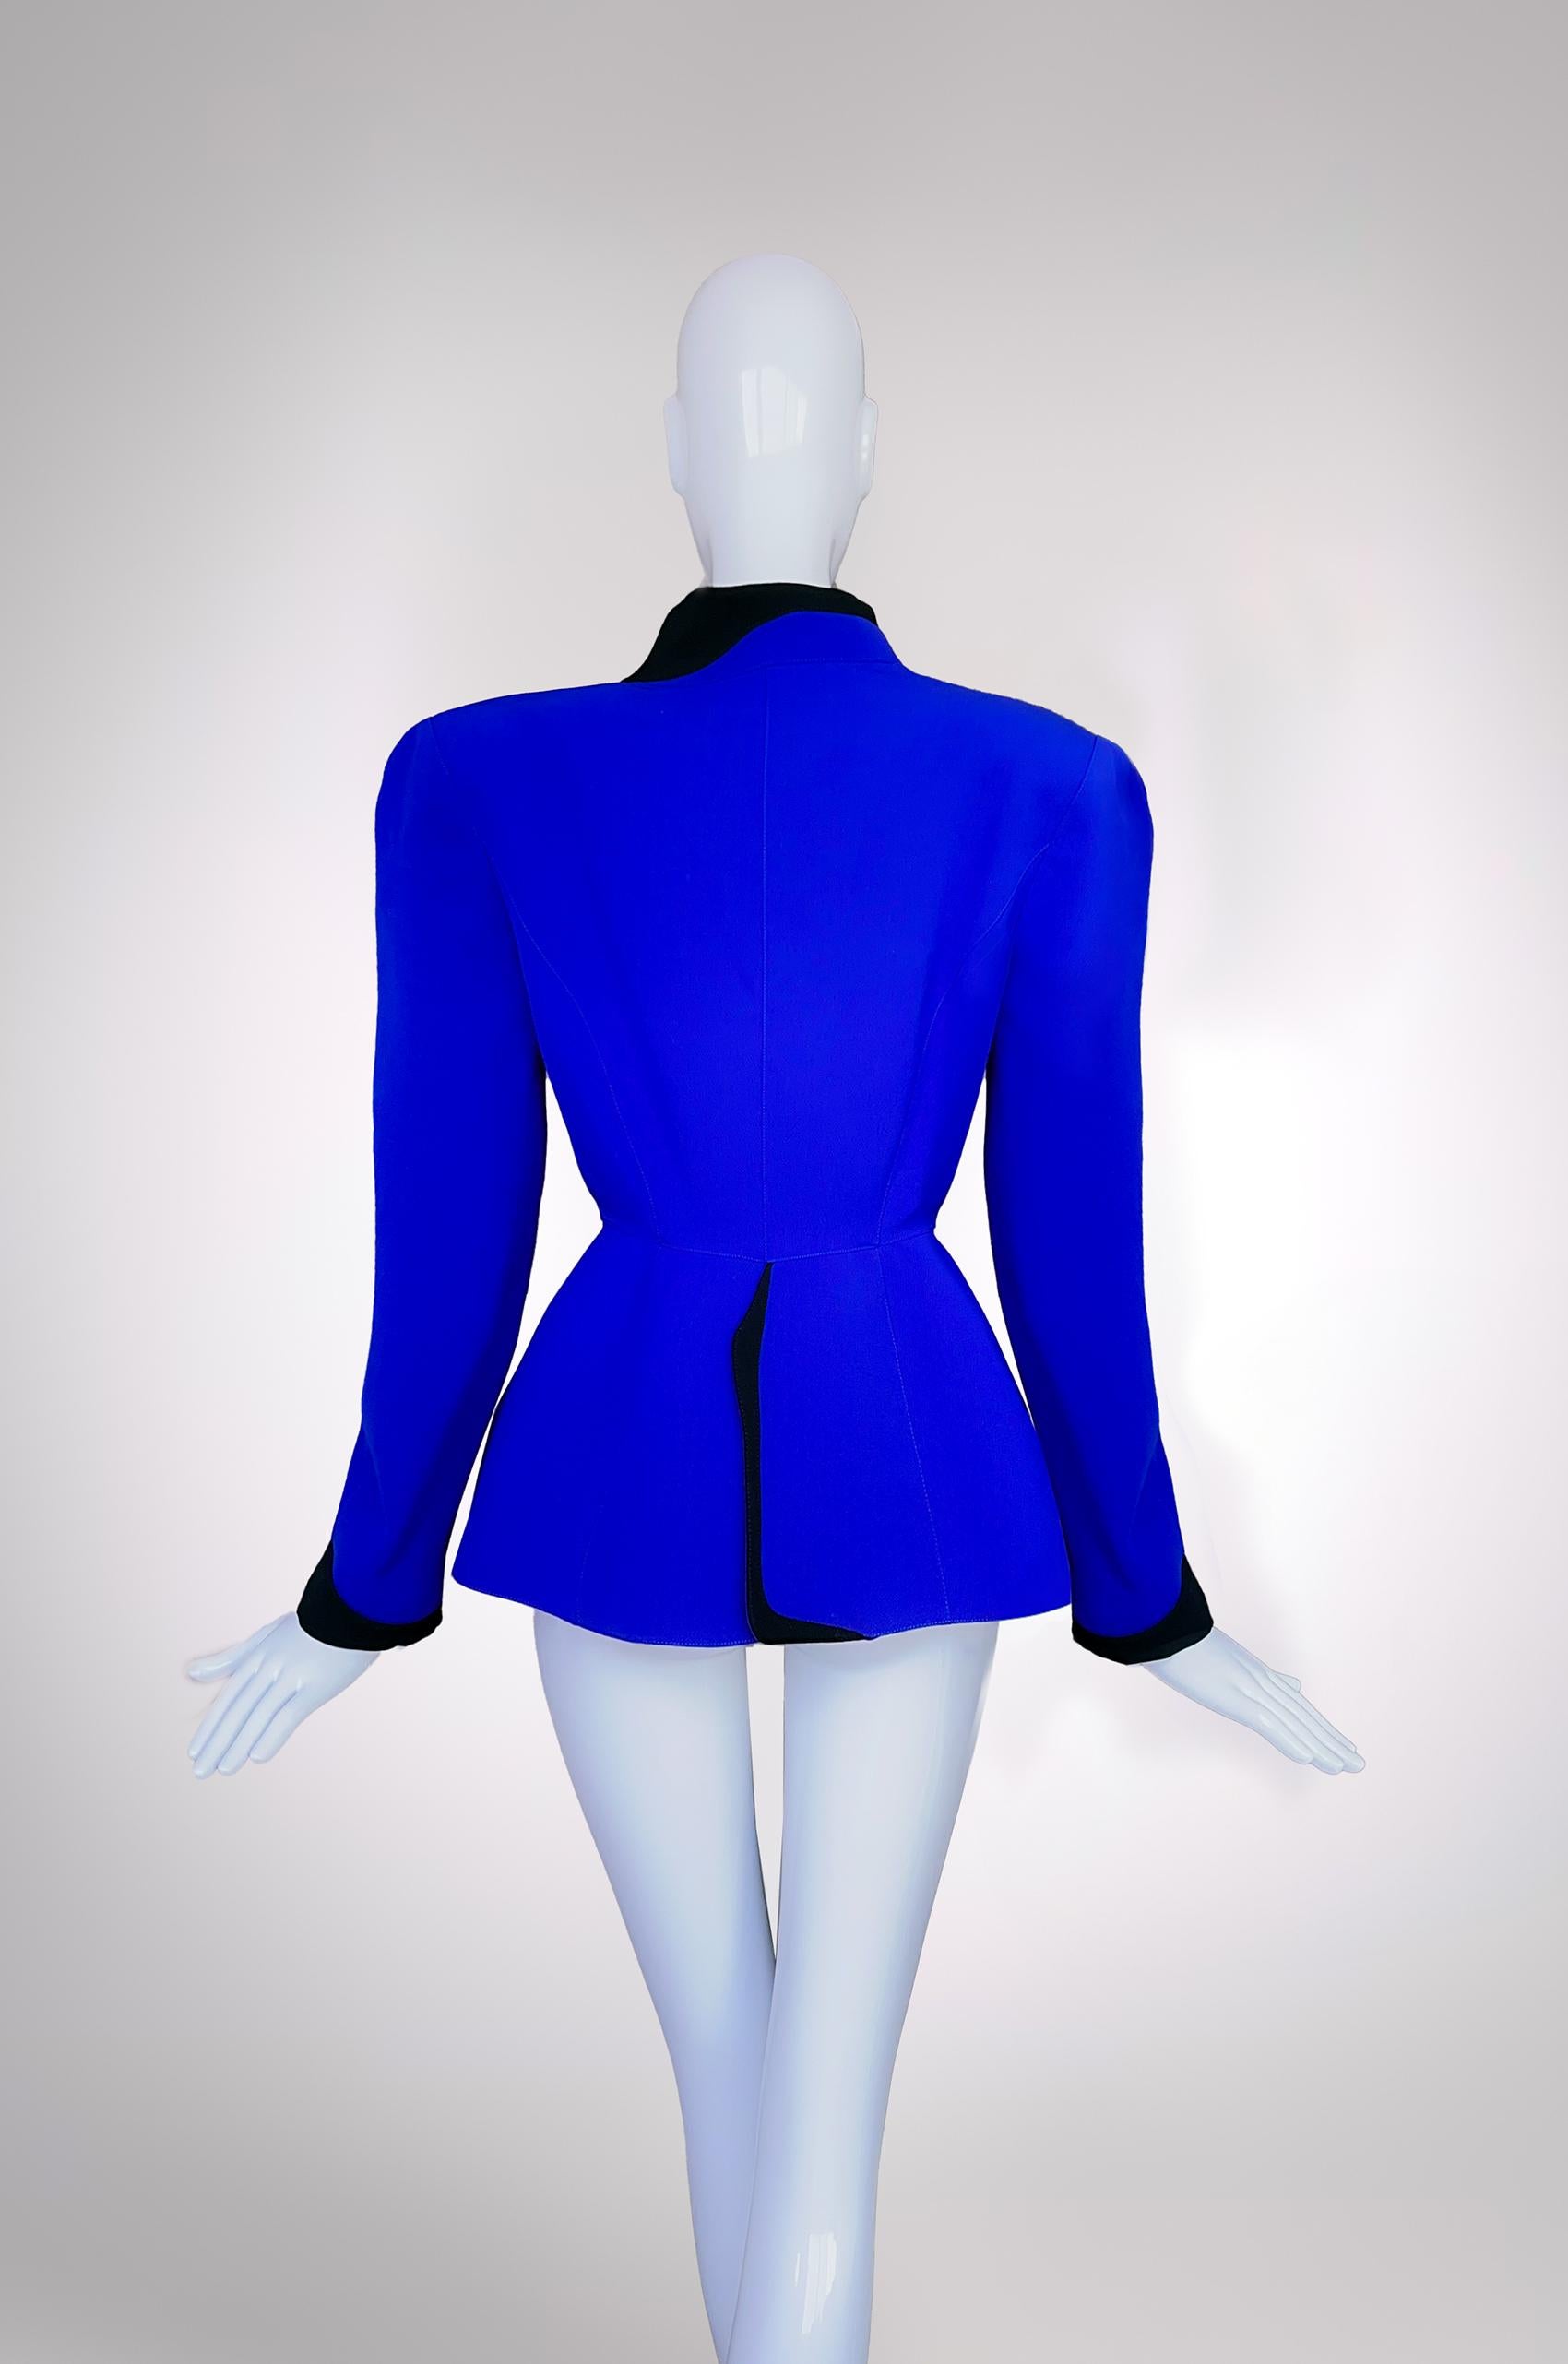 Extremely rare Colelctors Piece
Archival Thierry Mugler Jacket, 1987 Collection (categorized by Fashion Institute of Technology NYC).
A truly fabulous piece! Typical Thierry Mugler hyper feminine silhouette with fitted waist and stunning